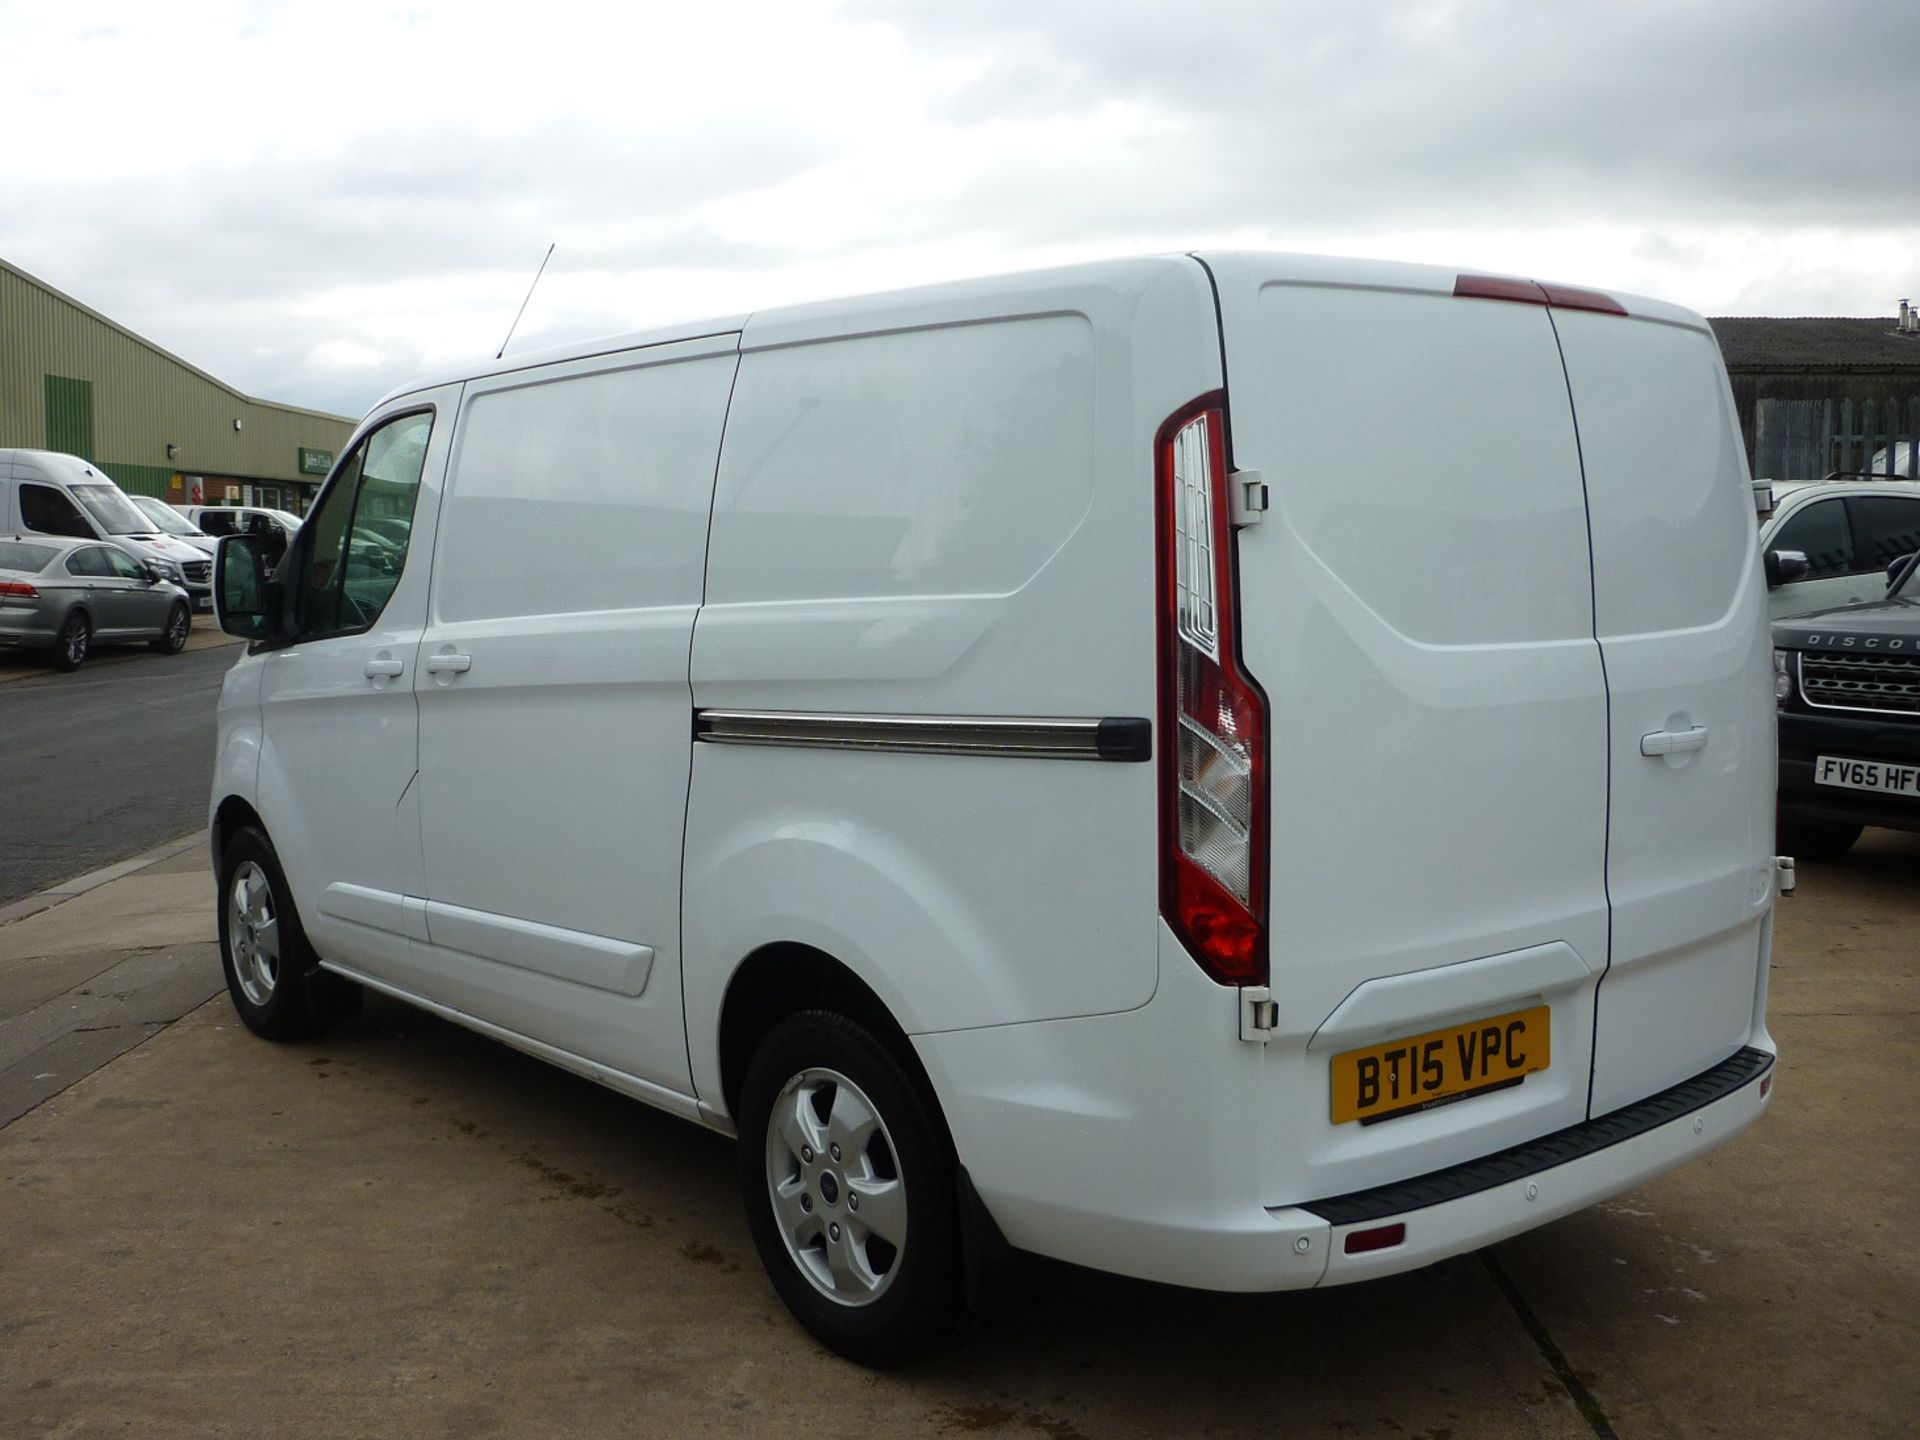 2015/15 REG FORD TRANSIT CUSTOM 270 LIMITED EDITION 125PS DIESEL PANEL VAN, SHOWING 0 FORMER KEEPERS - Image 3 of 5